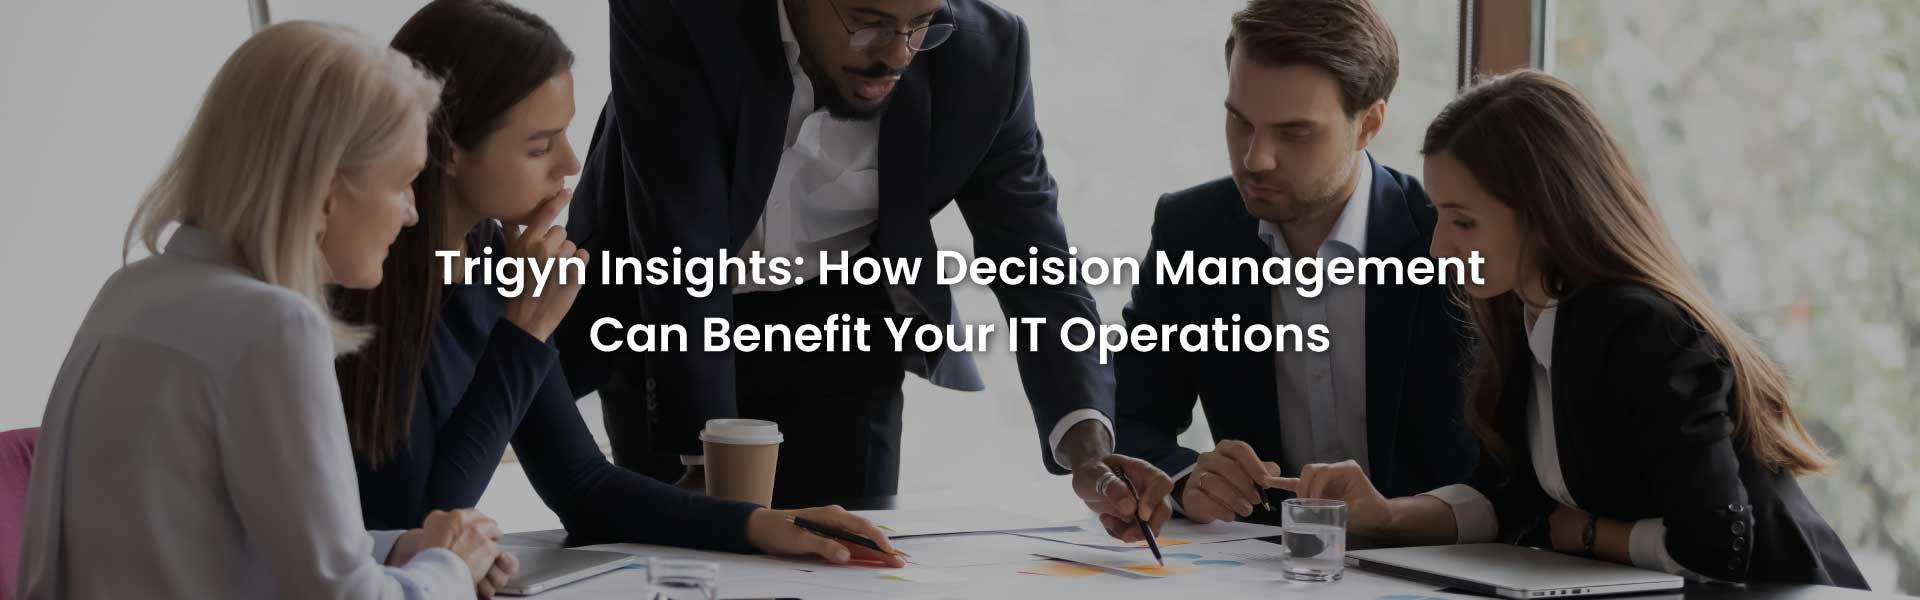 Ways Decision Management Can Benefit Your IT Operations